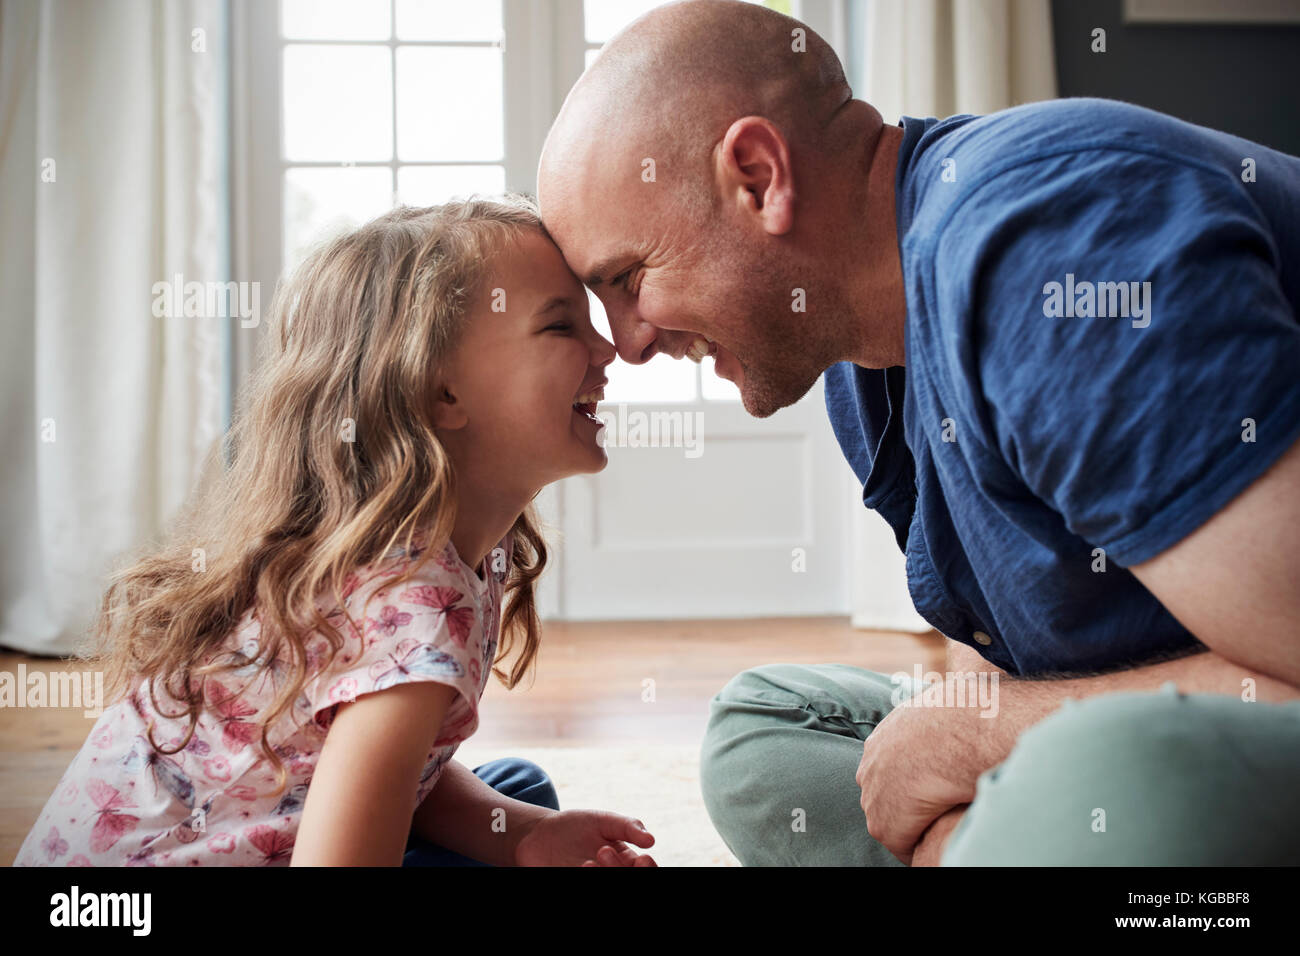 Father and daughter sitting on floor at home touching heads Stock Photo